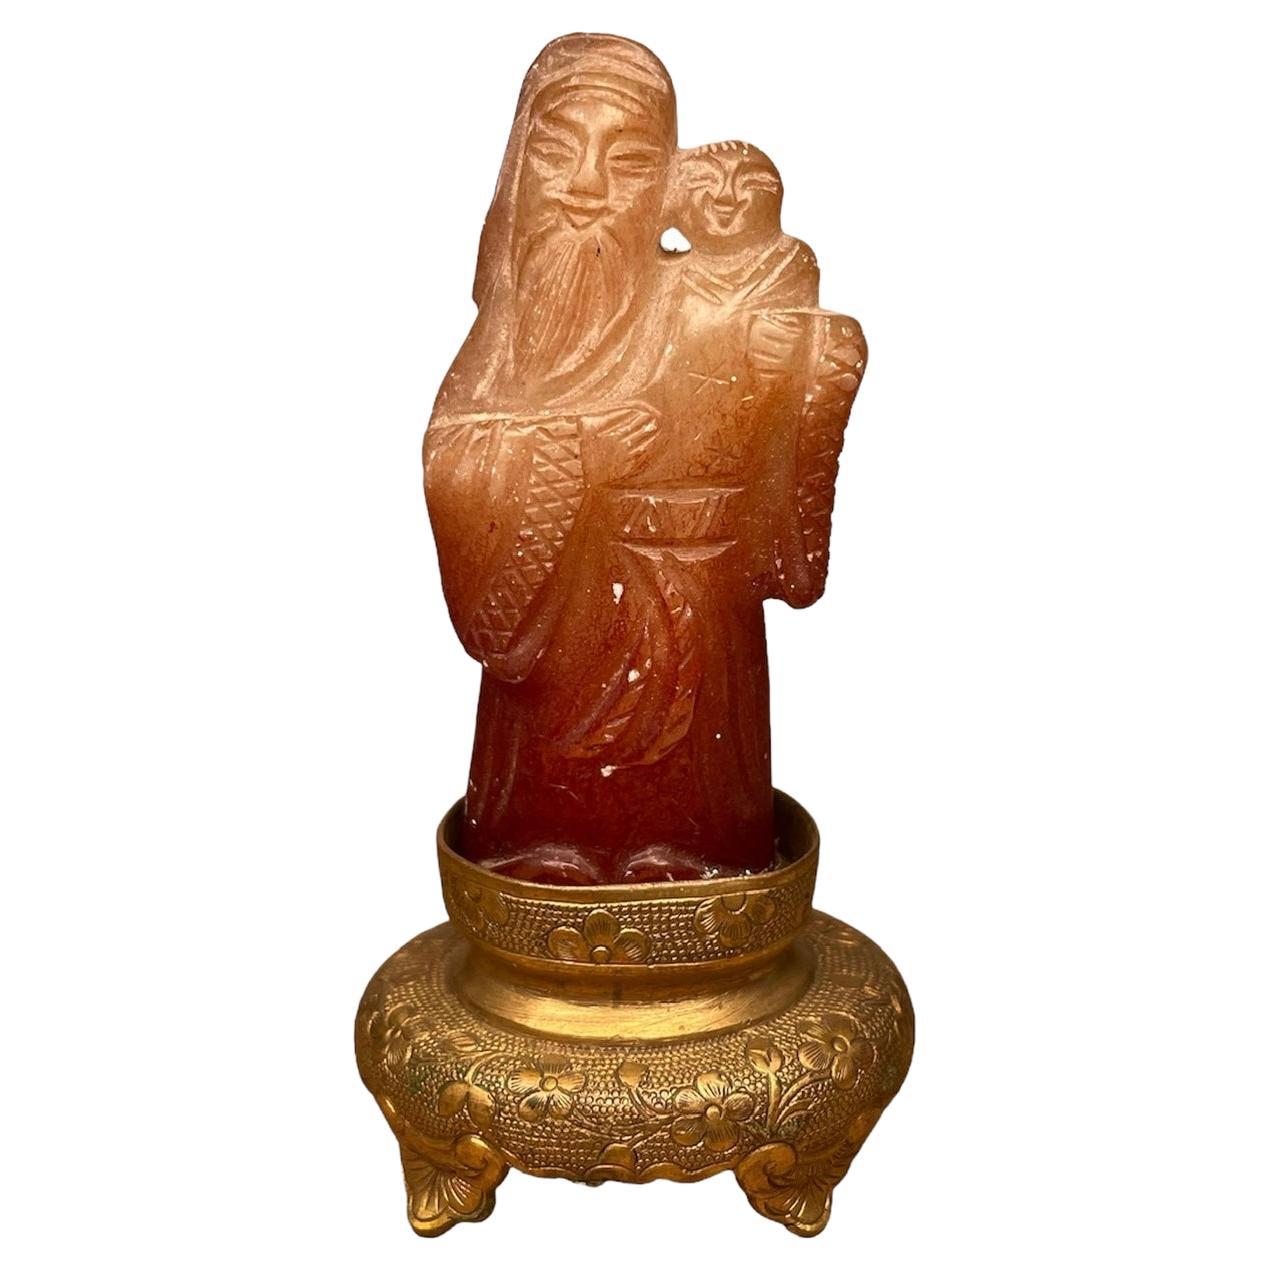 Carved Jade Old Man with Child Figurine